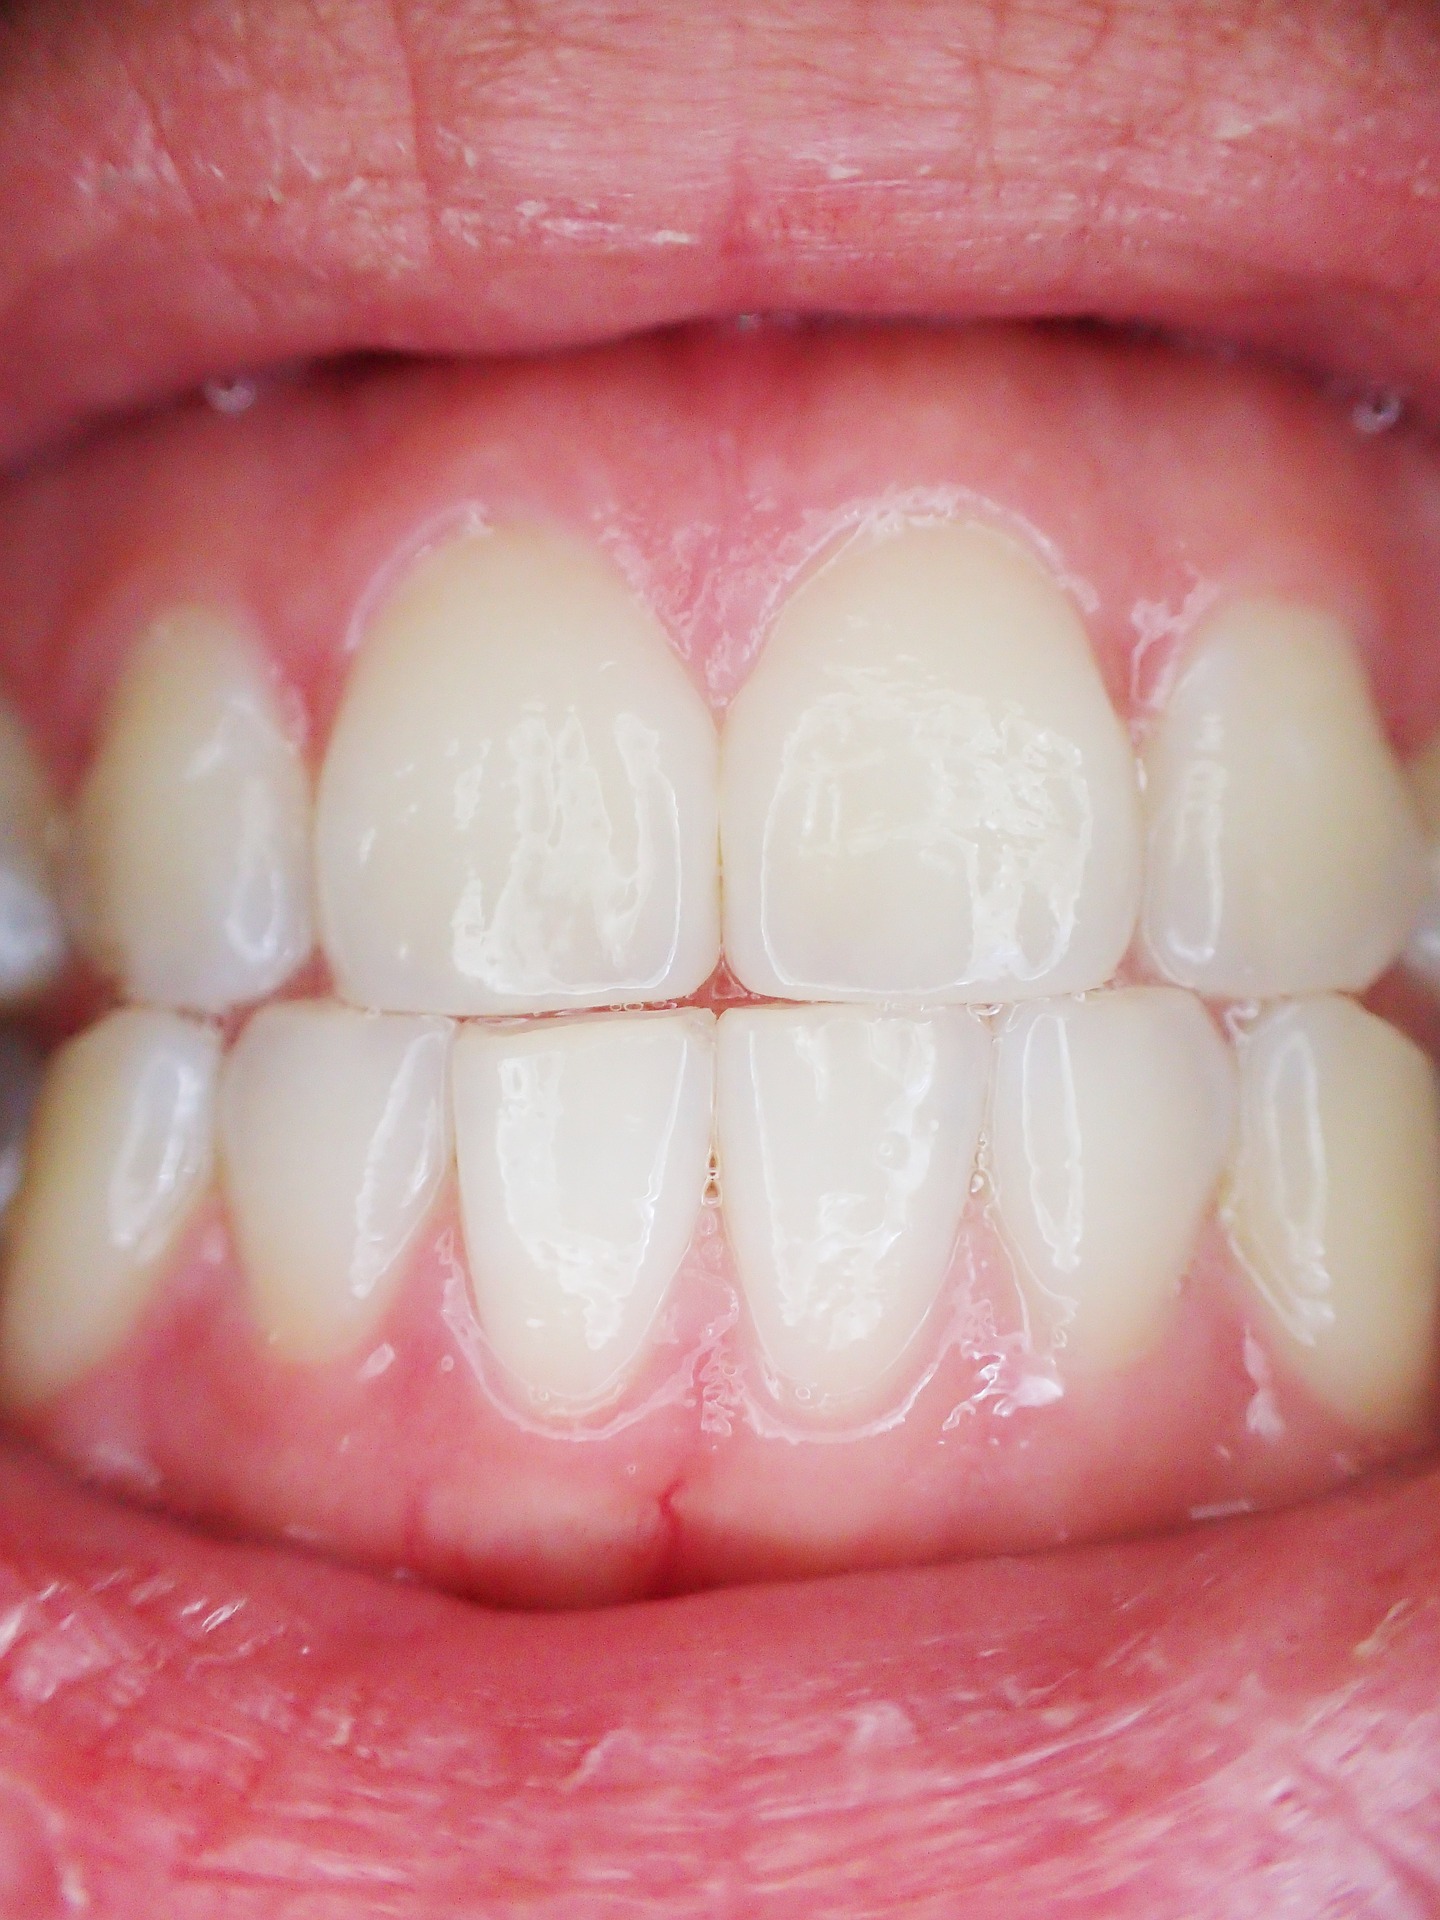 Healthy gums without bleeding